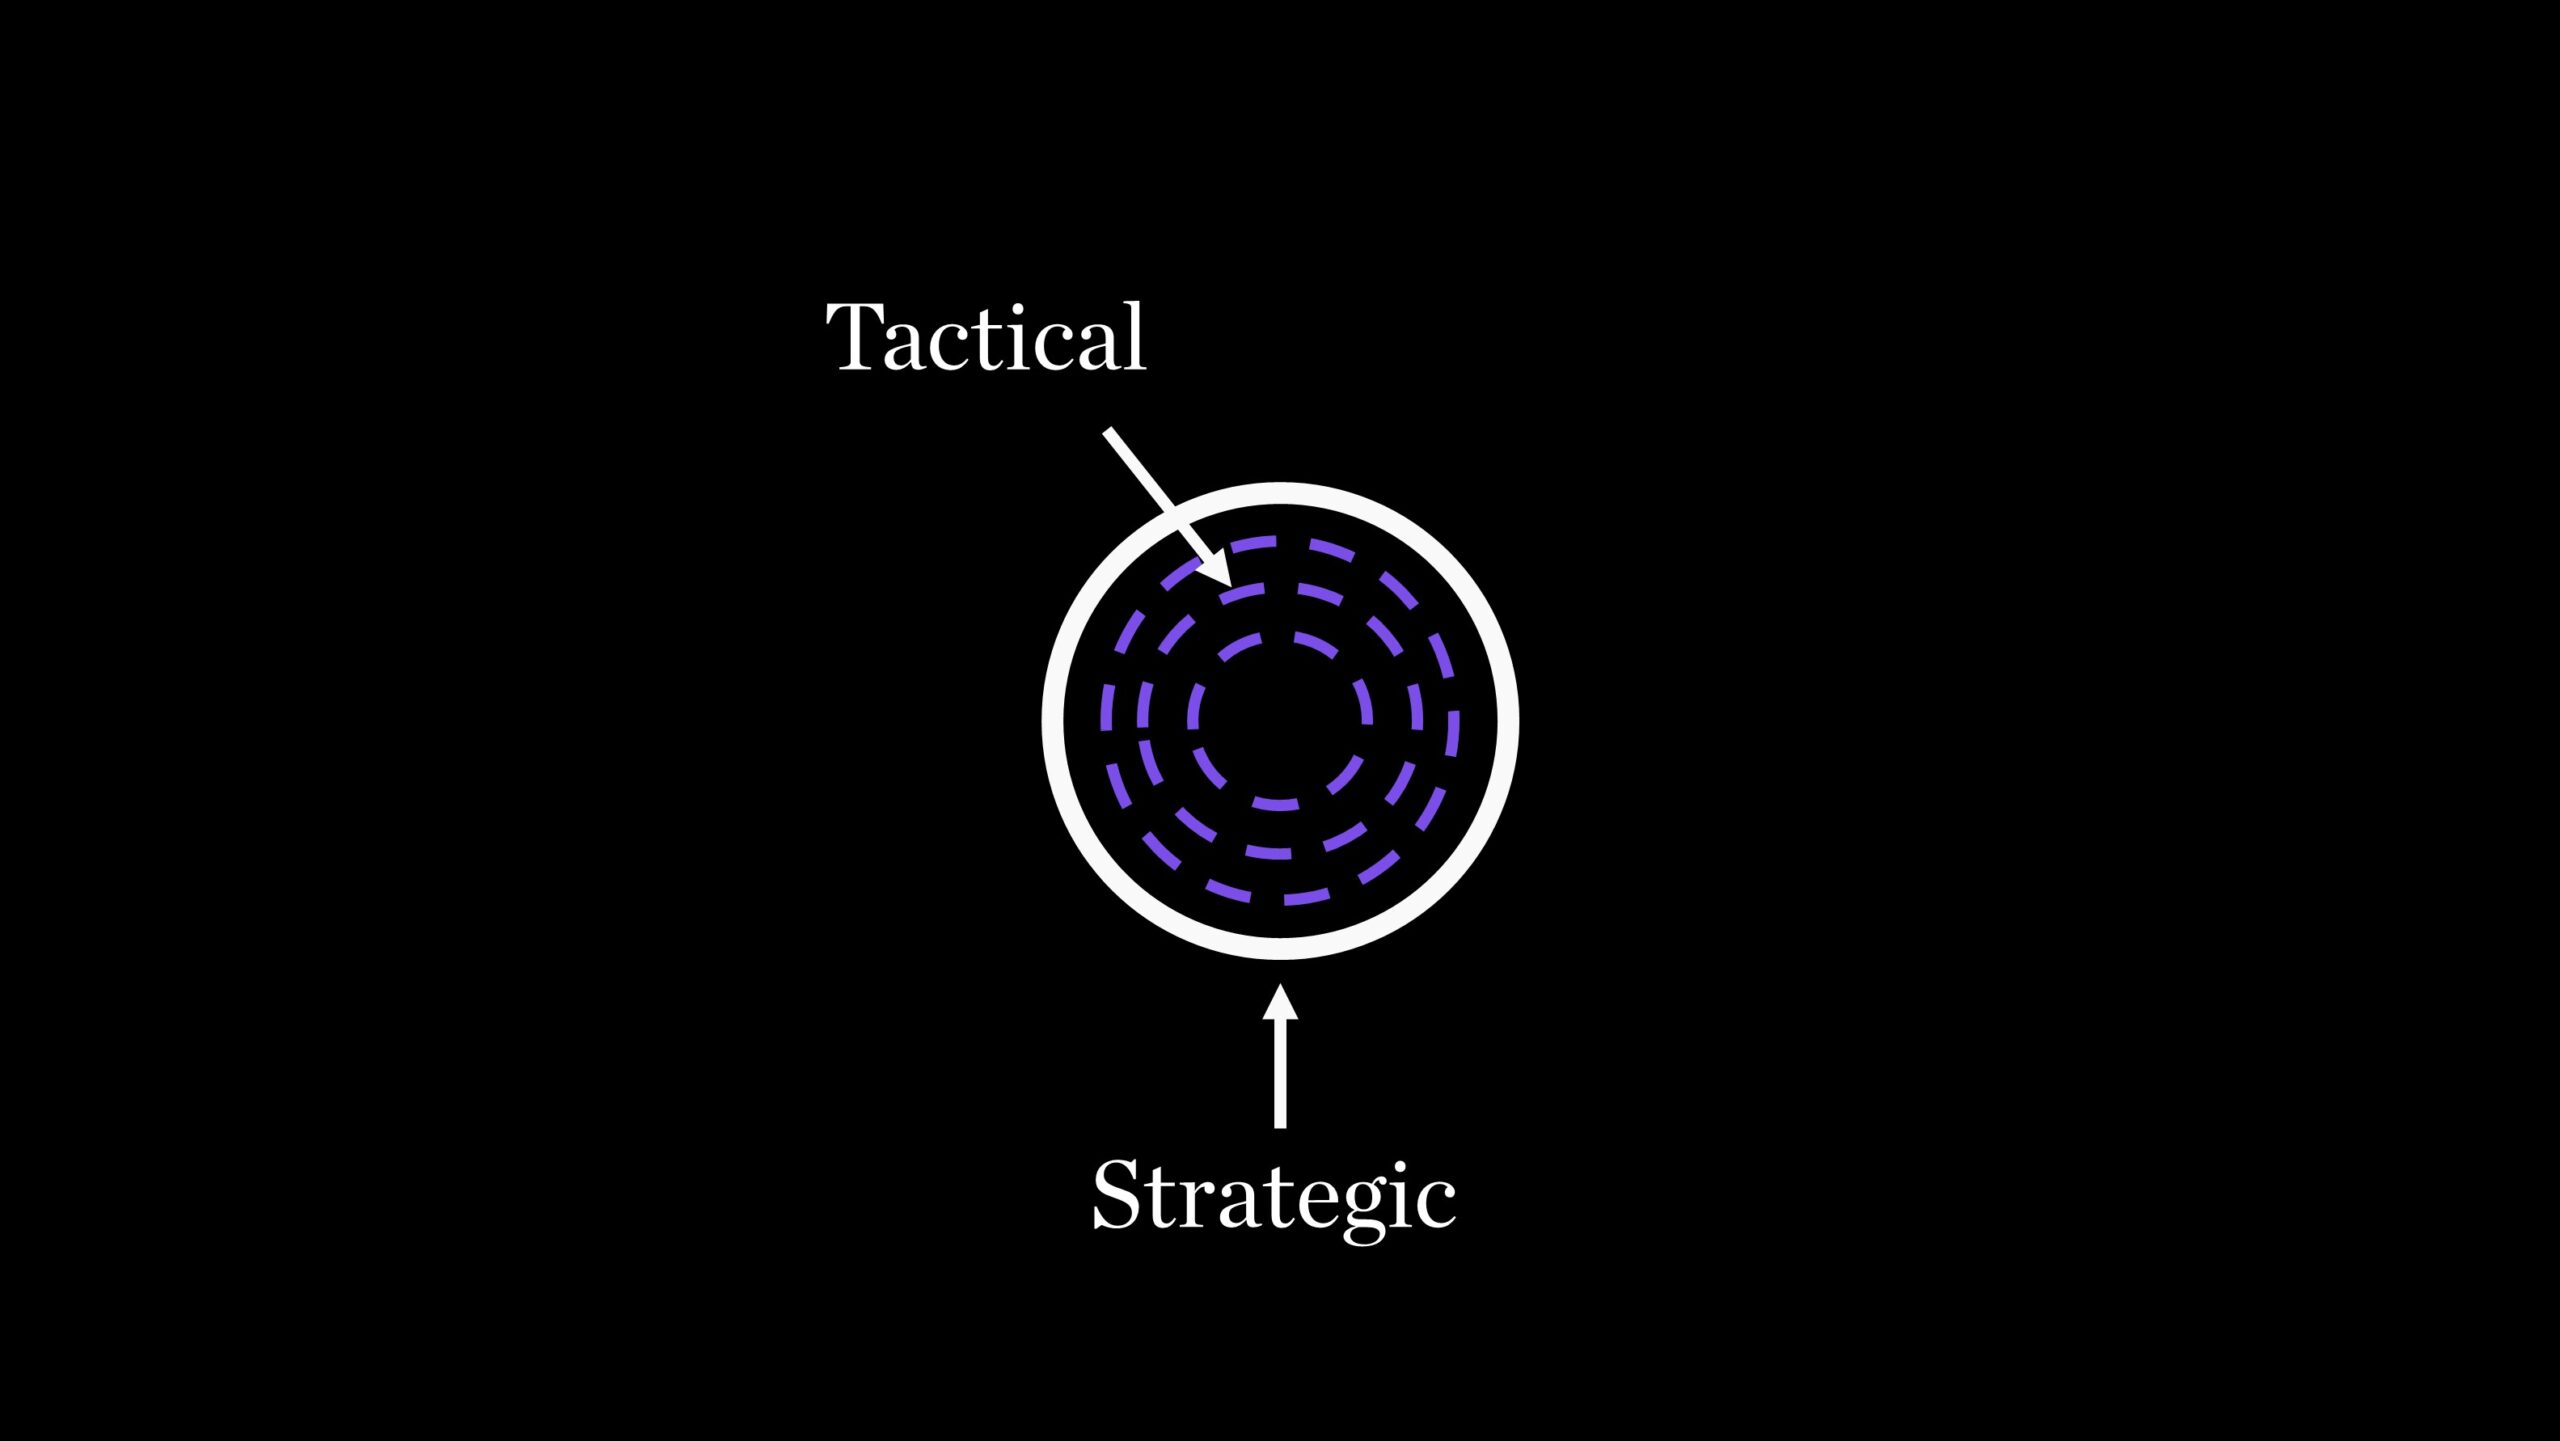 Tactical or Strategic Thinker: Which One Are You